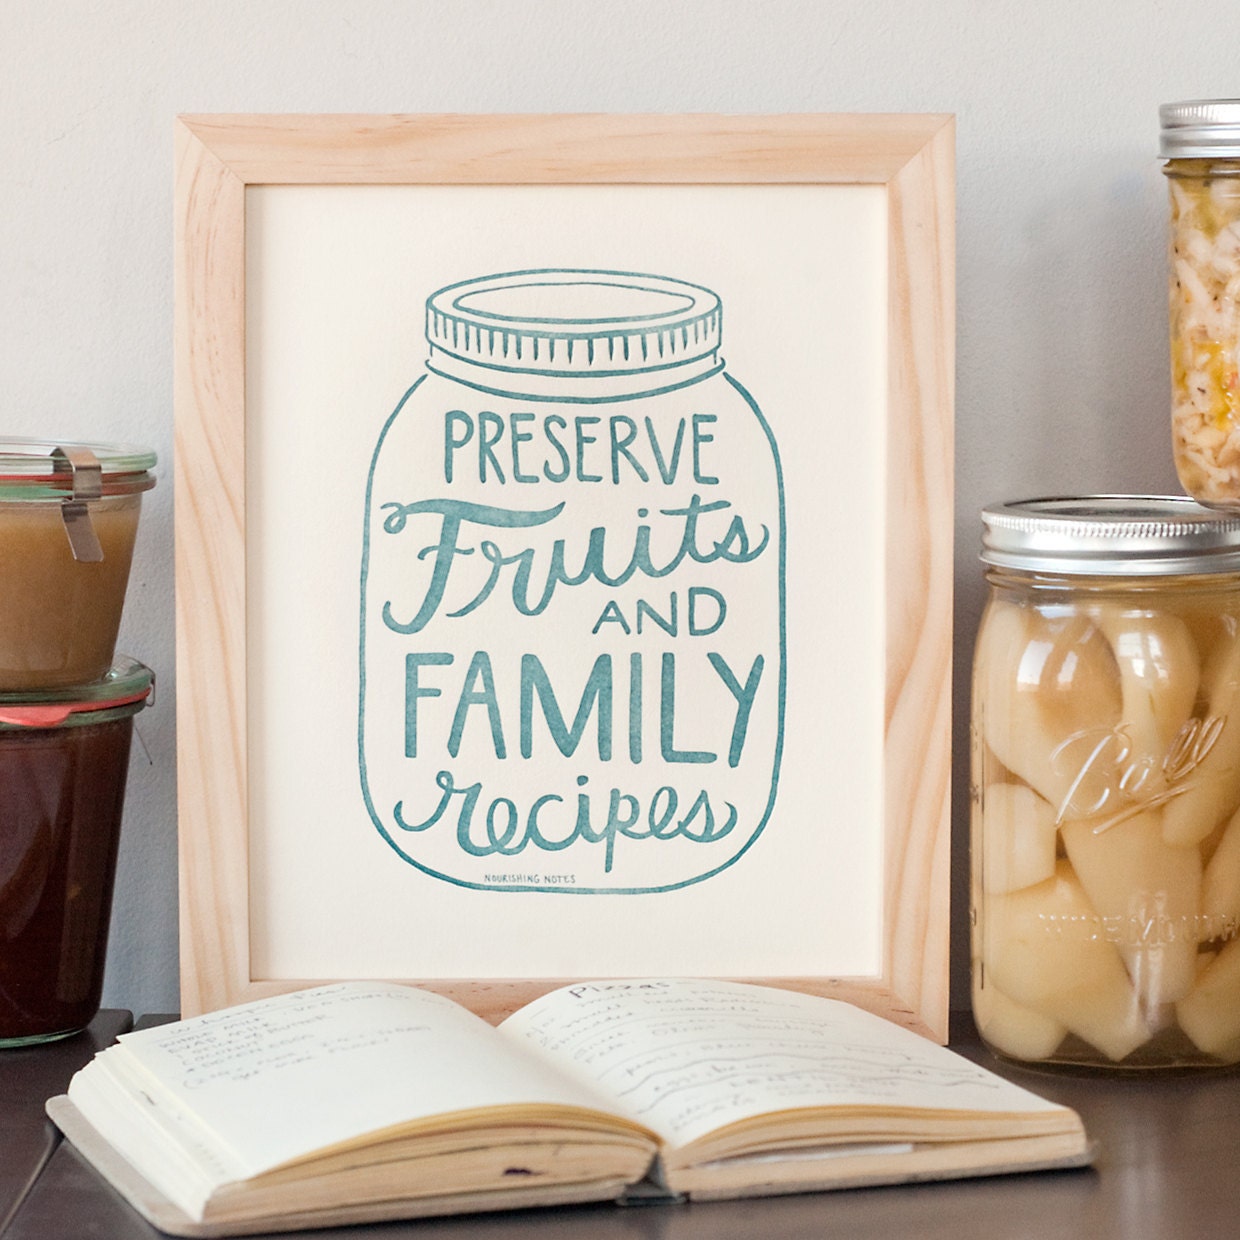 Preserve fruits and family recipes 8 x 10 print